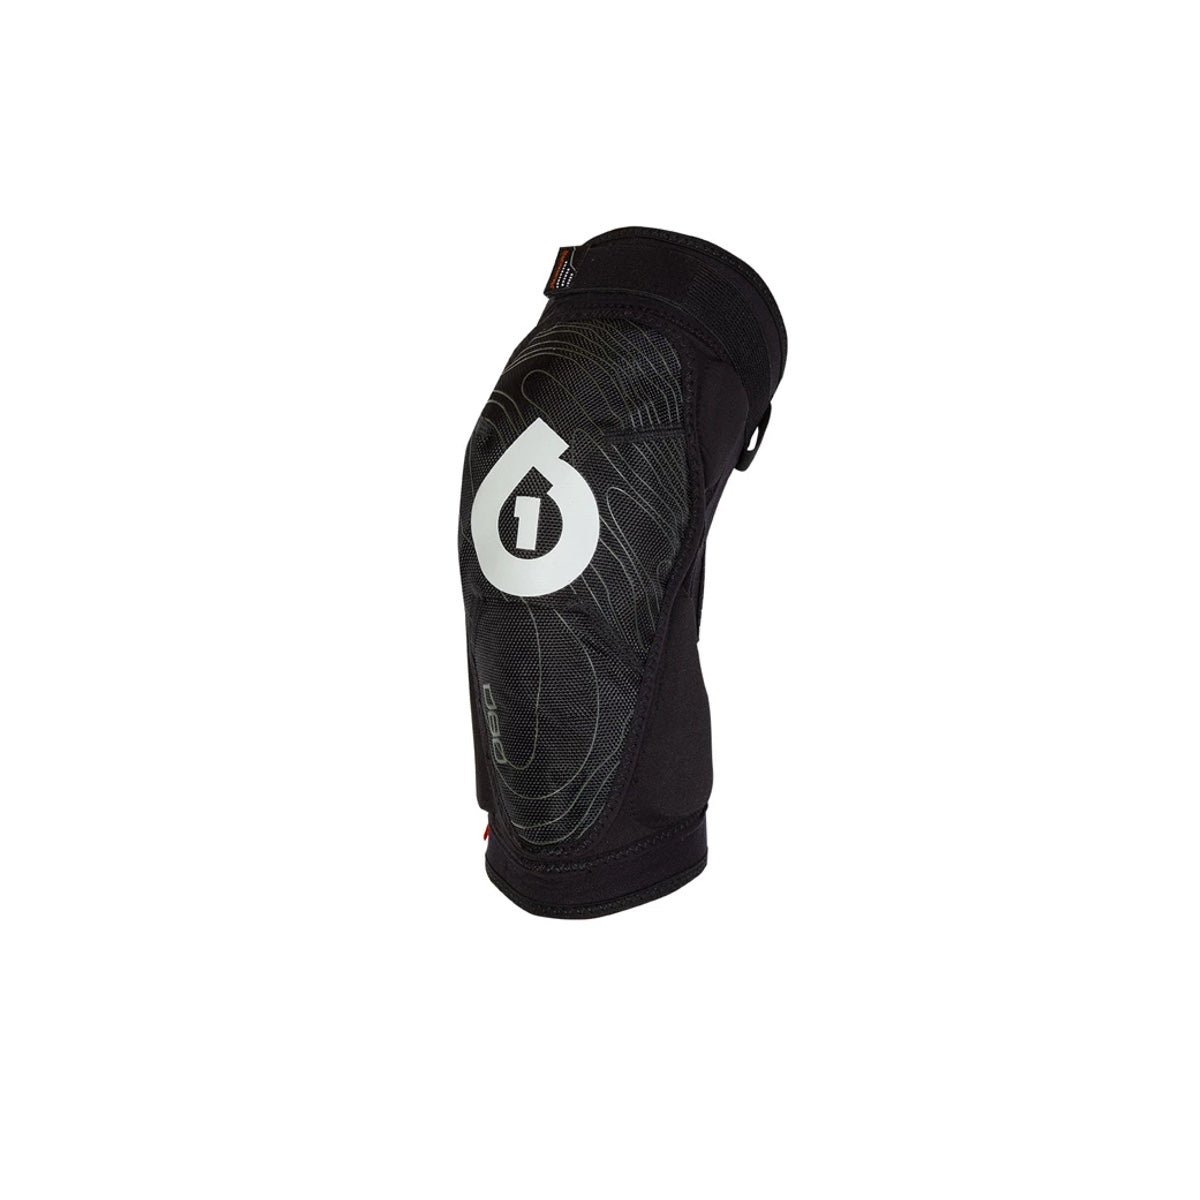 661 DBO Elbow Pads, Black, Youth